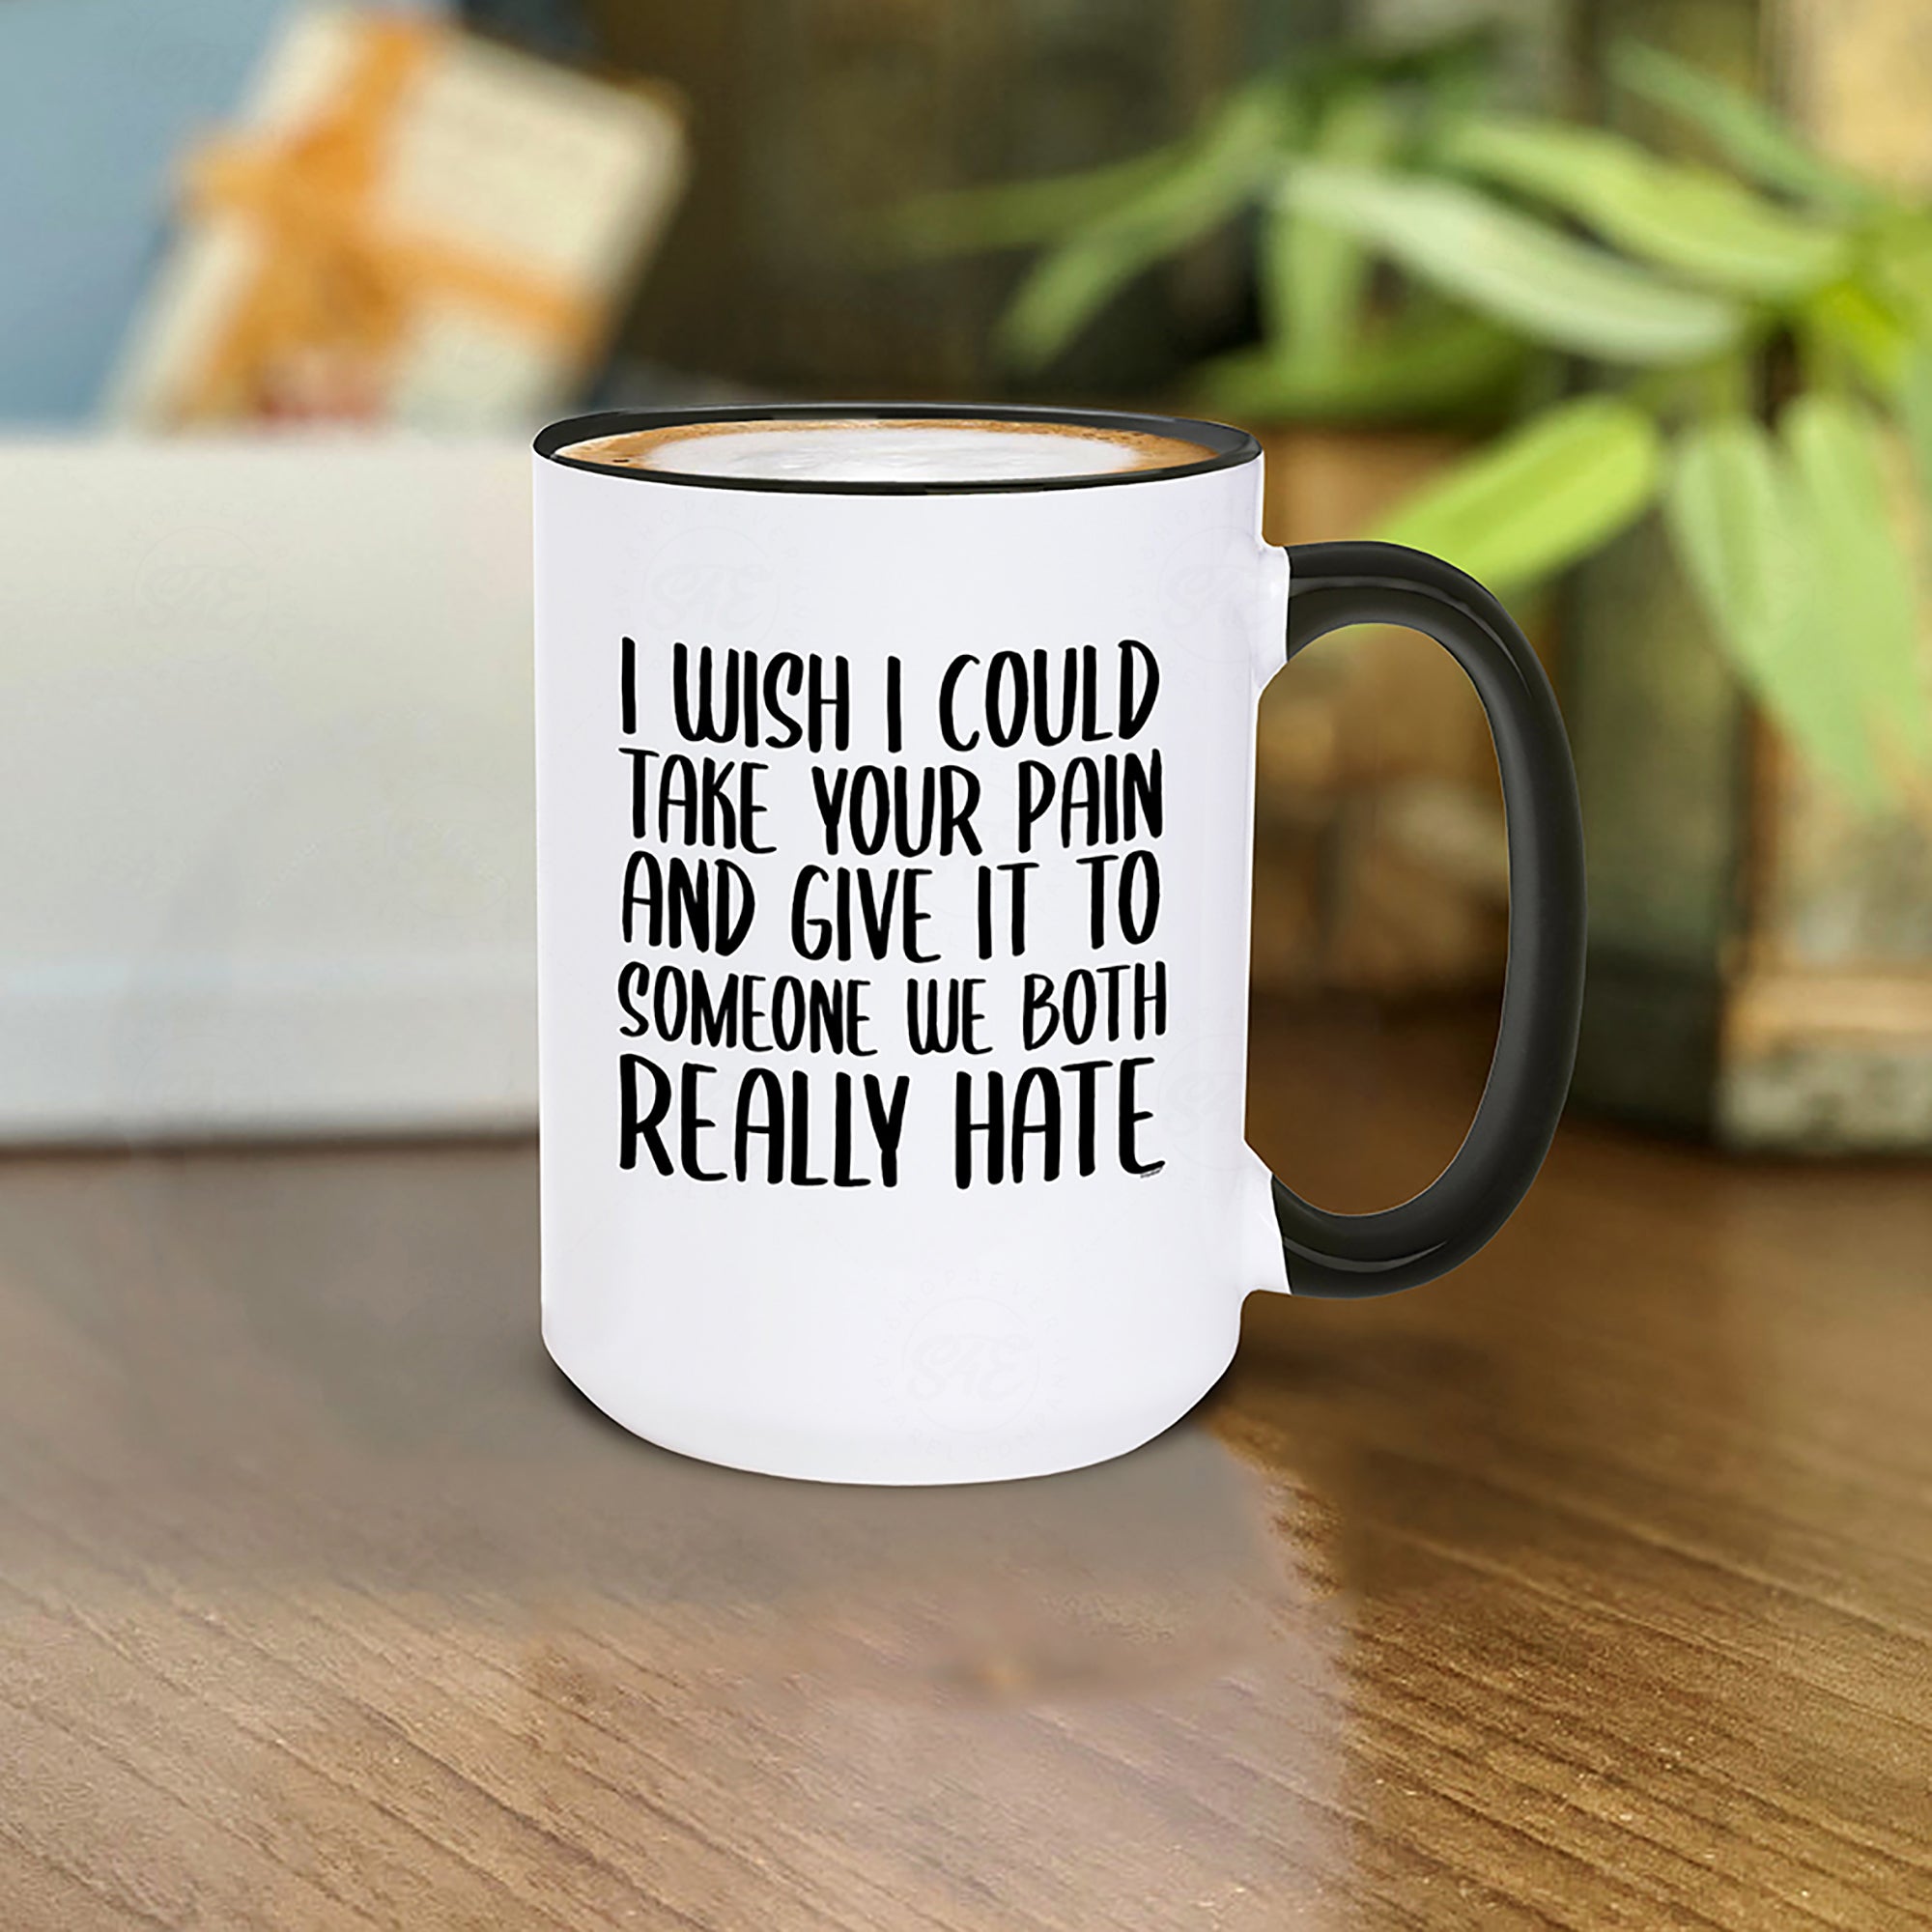 I Wish I Could Take Your Pain And Give It To Someone We Both Really Hate Ceramic Coffee Mug Funny Divorce Breakup Surgery Get Well Soon Mug (Black Handle, 15 oz.)